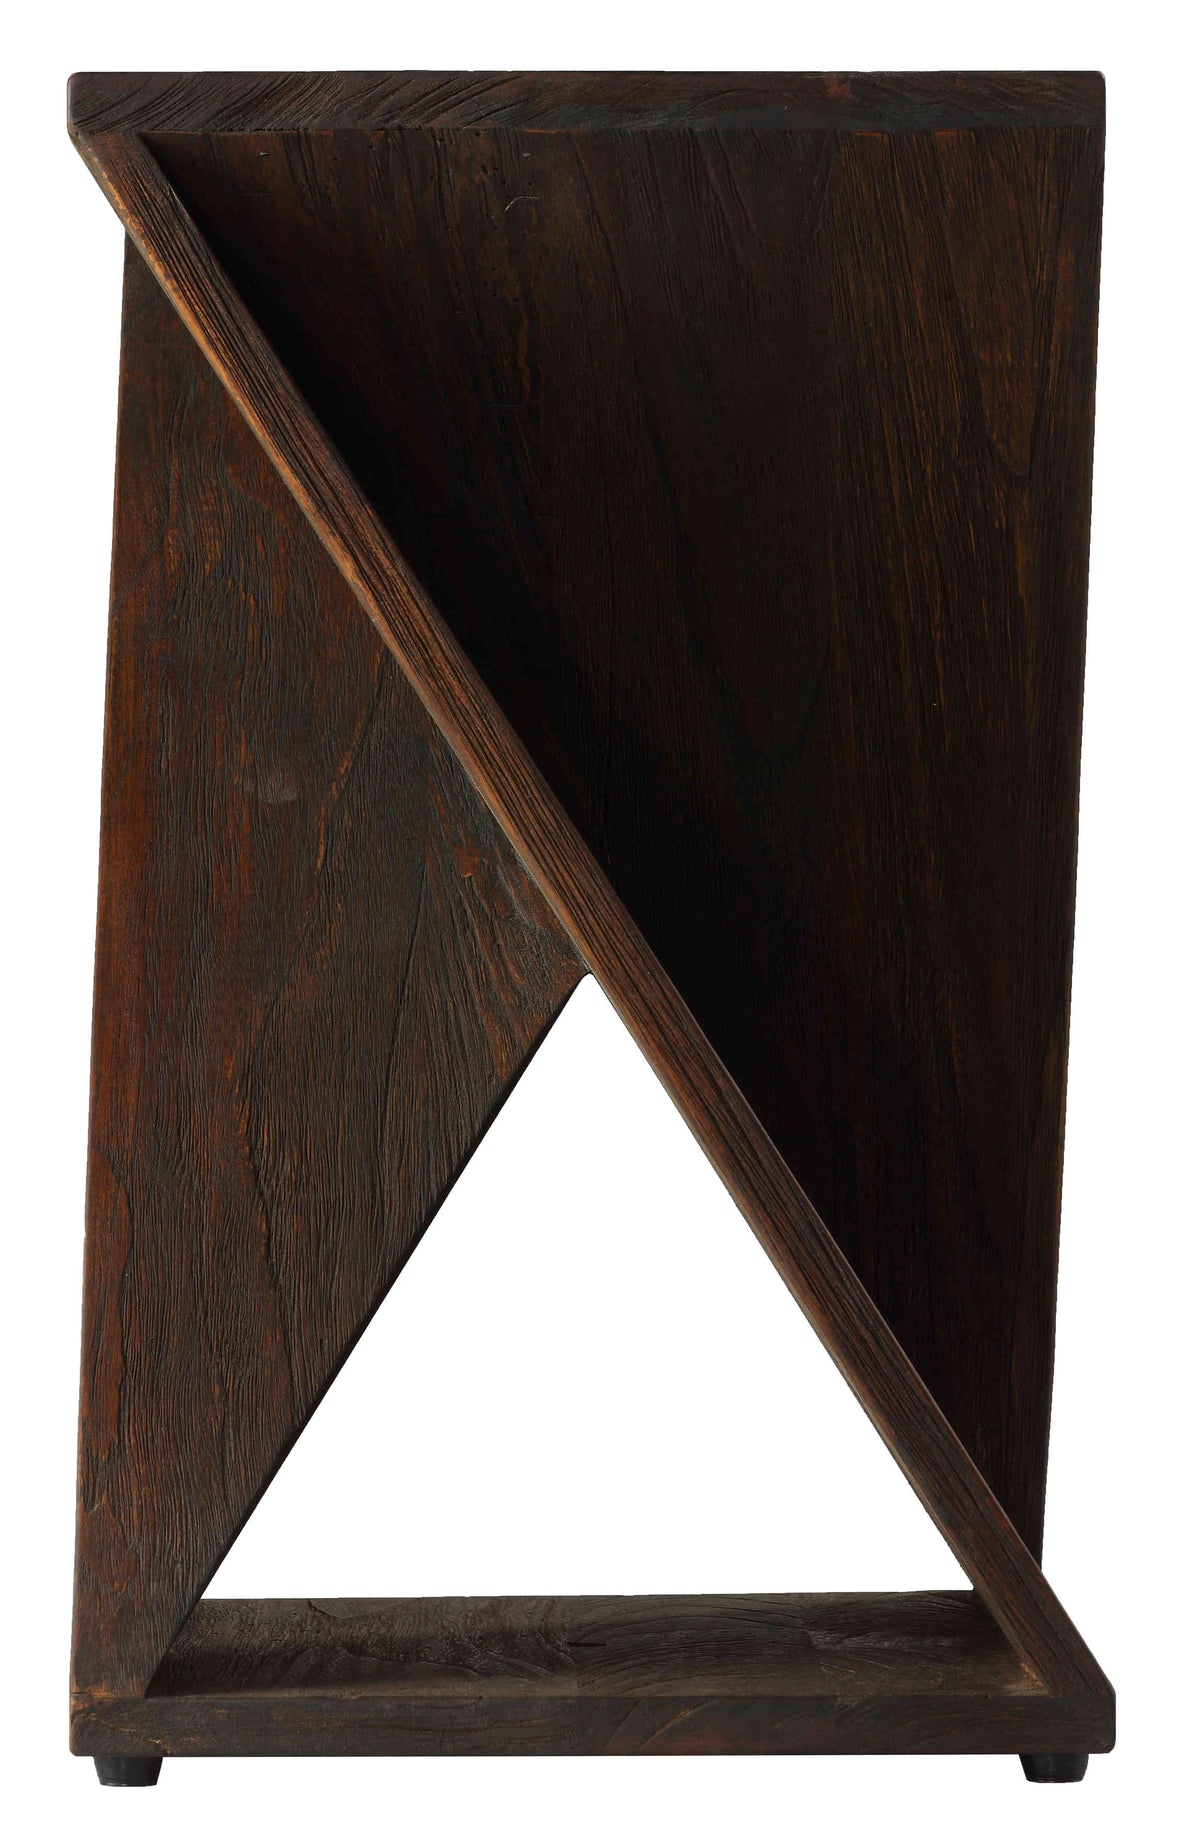 Bare Decor Twister End Table in Reclaimed Solid Teak Wood, Brown